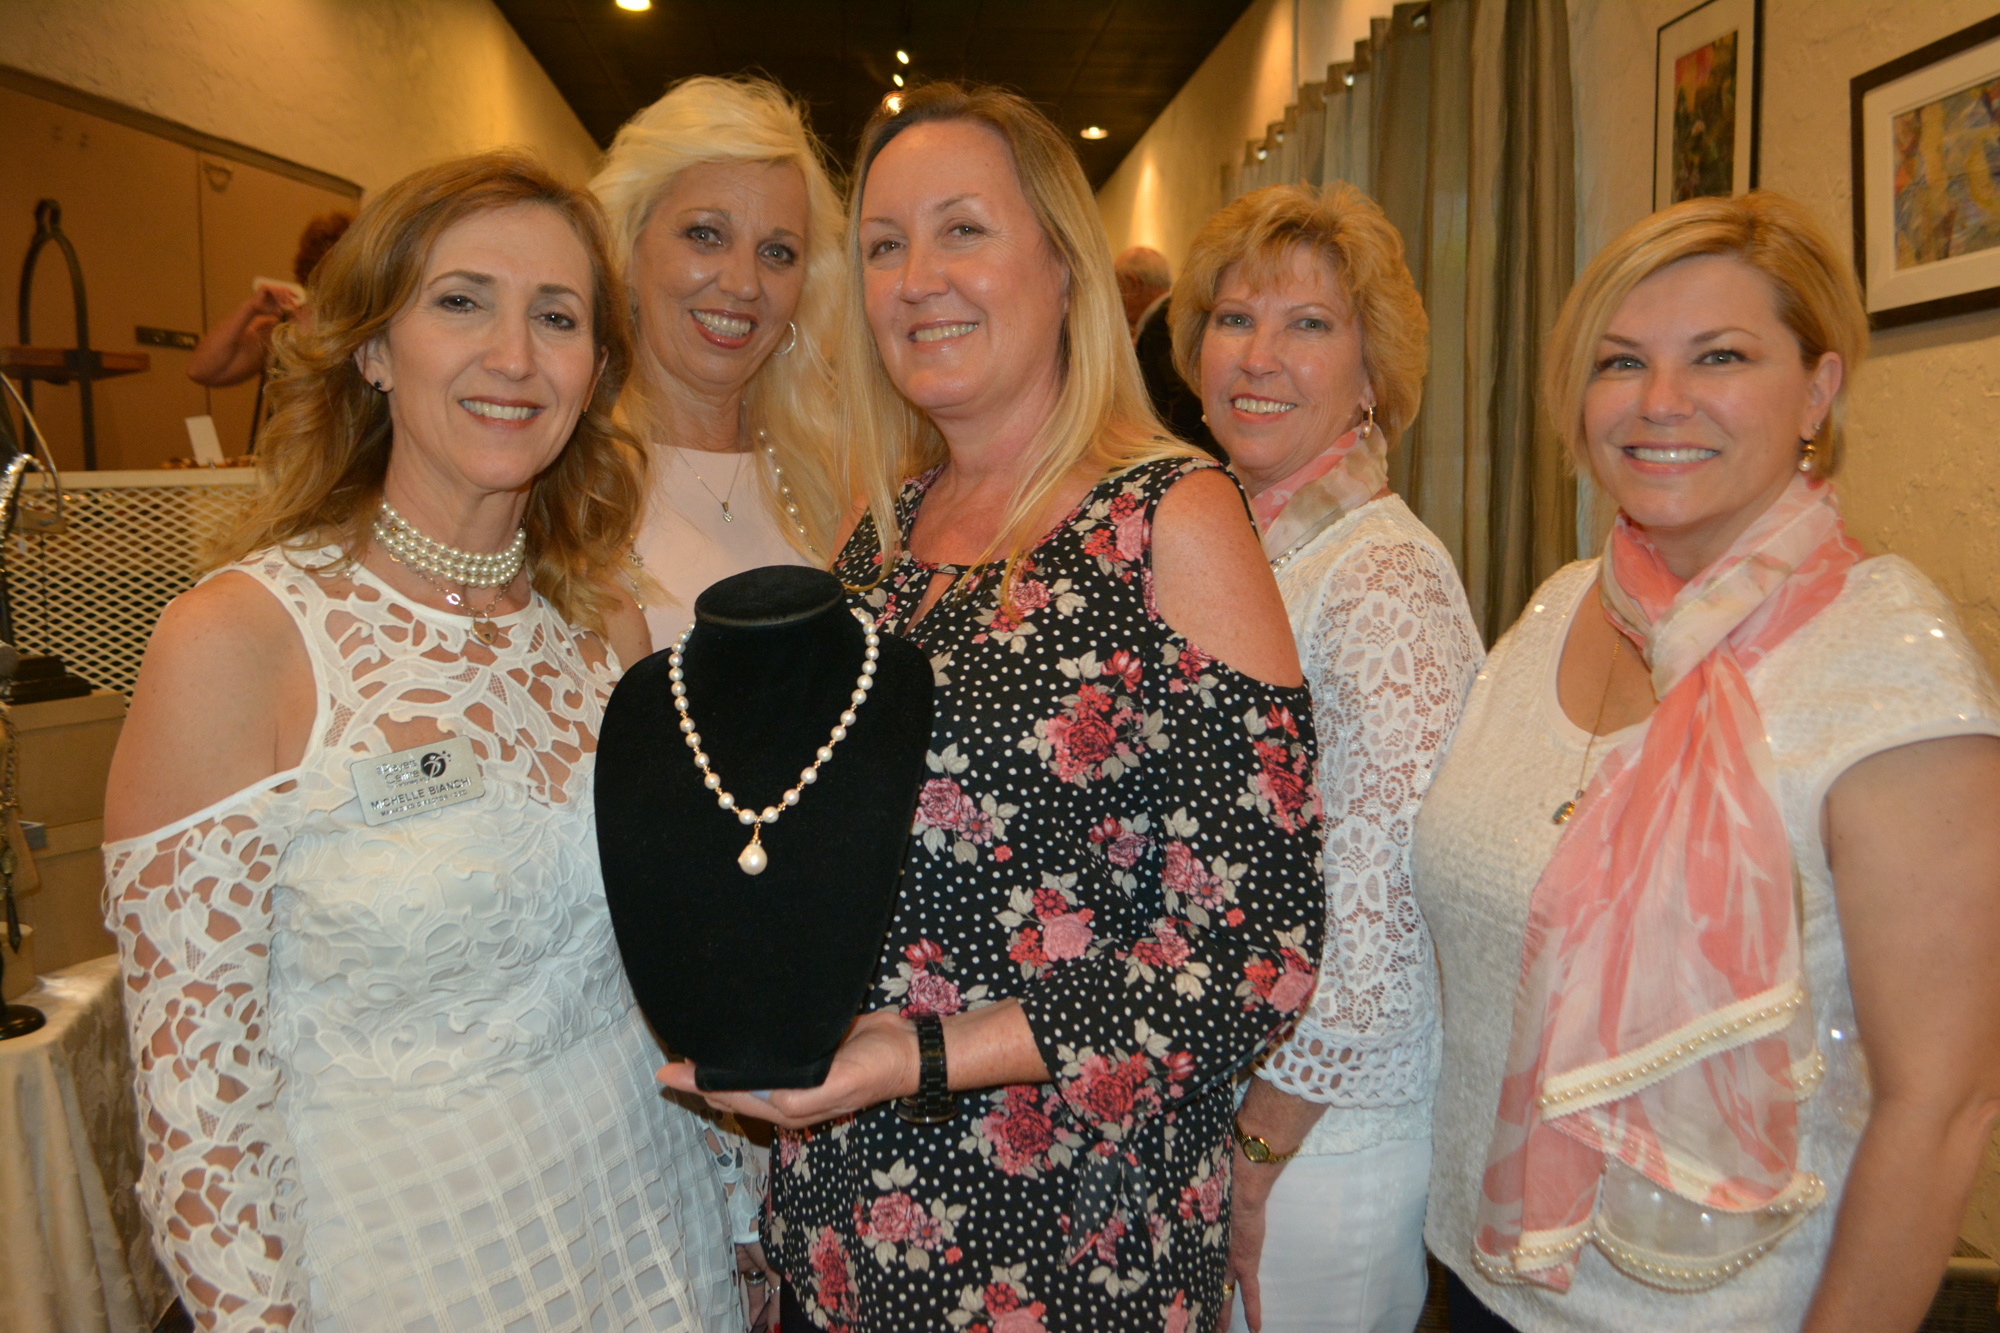 Sisterhood for Good's Michelle Bianchi, Wanda Martinetto, Kathy Fraley, Kathy Collums and Angela Massaro-Fain pose with the necklace being auctioned off to raise money for charity.